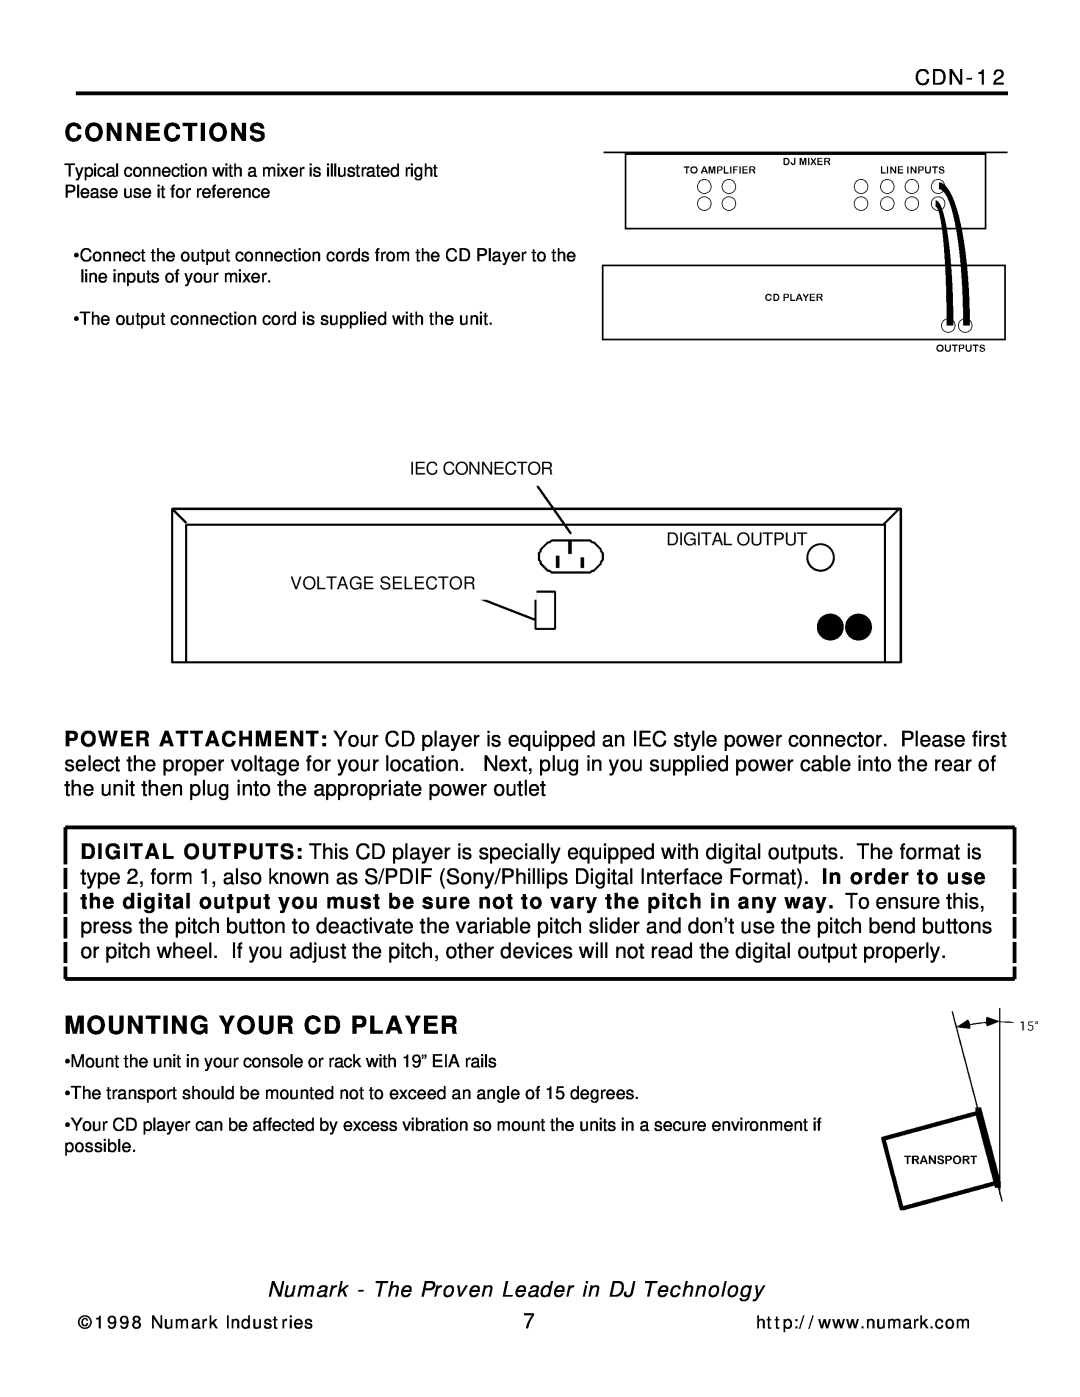 Numark Industries CDN-12 manual Connections, Mounting Your Cd Player, Numark - The Proven Leader in DJ Technology 